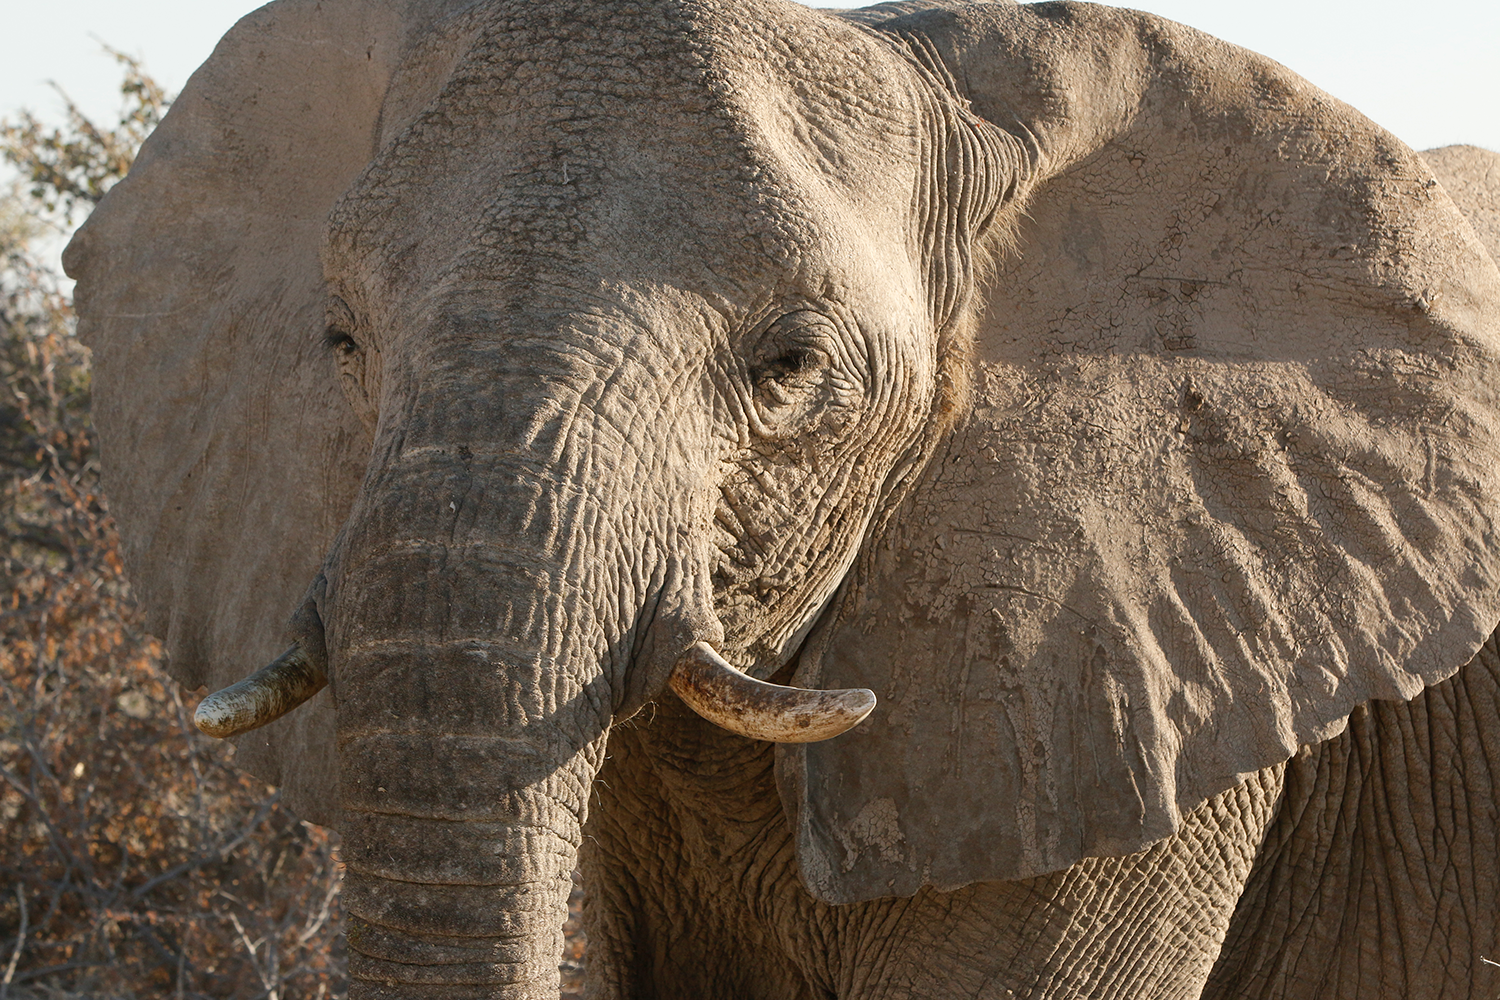 An African elephant from the Native Conservancy.